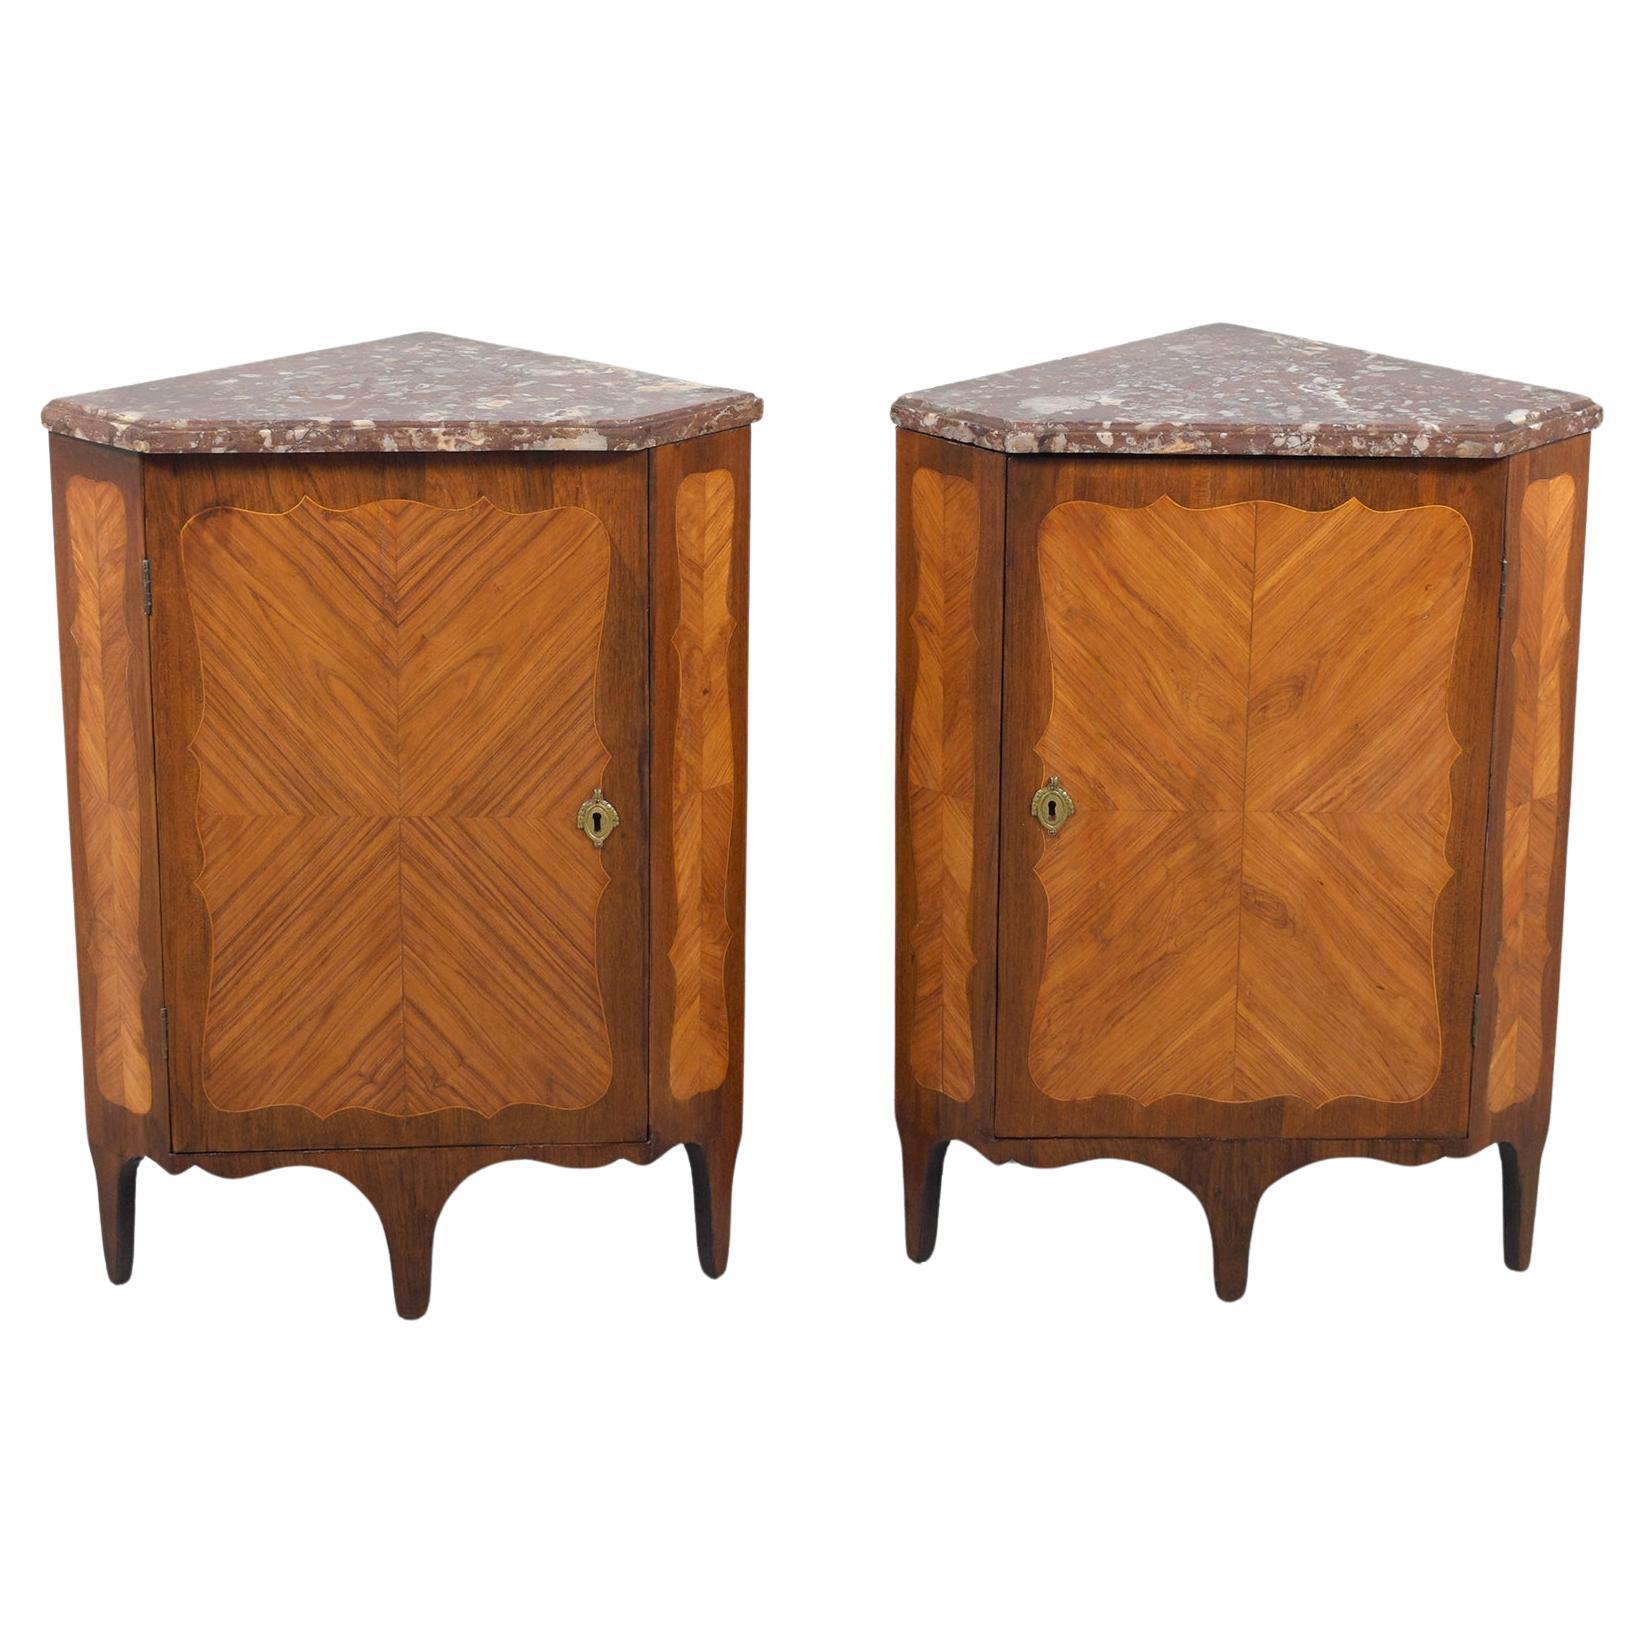 Late 18th-Century French Corner Cabinets with Marble Tops: Restored Elegance For Sale